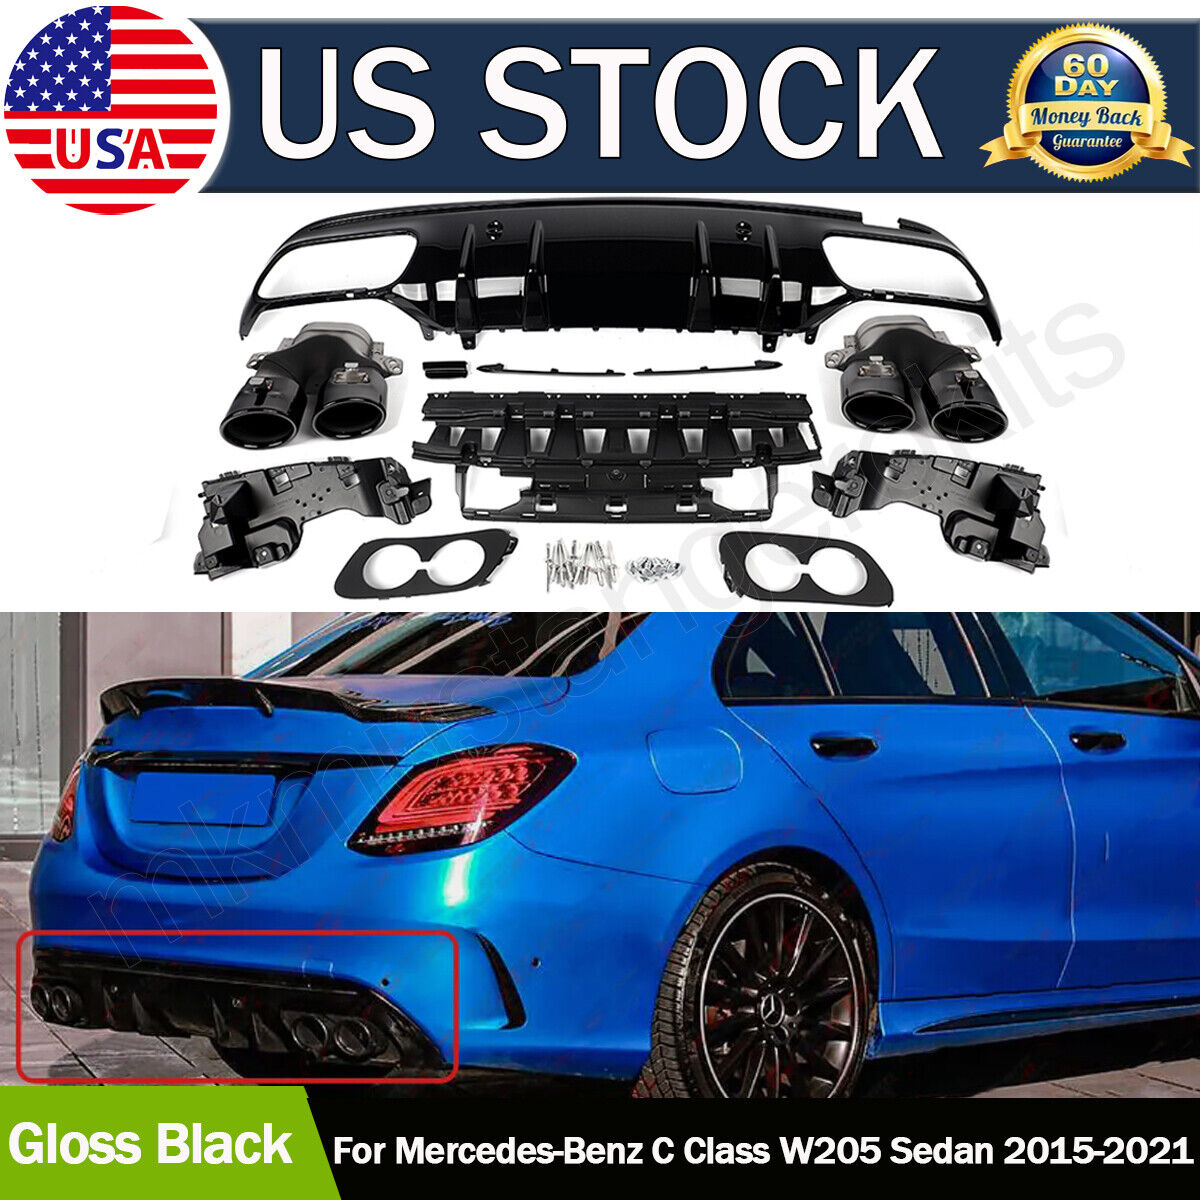 C43 STYLE REAR DIFFUSER + ROUND BLACK EXHAUST TIPS FOR 2015-2021 BENZ W205 SEDAN